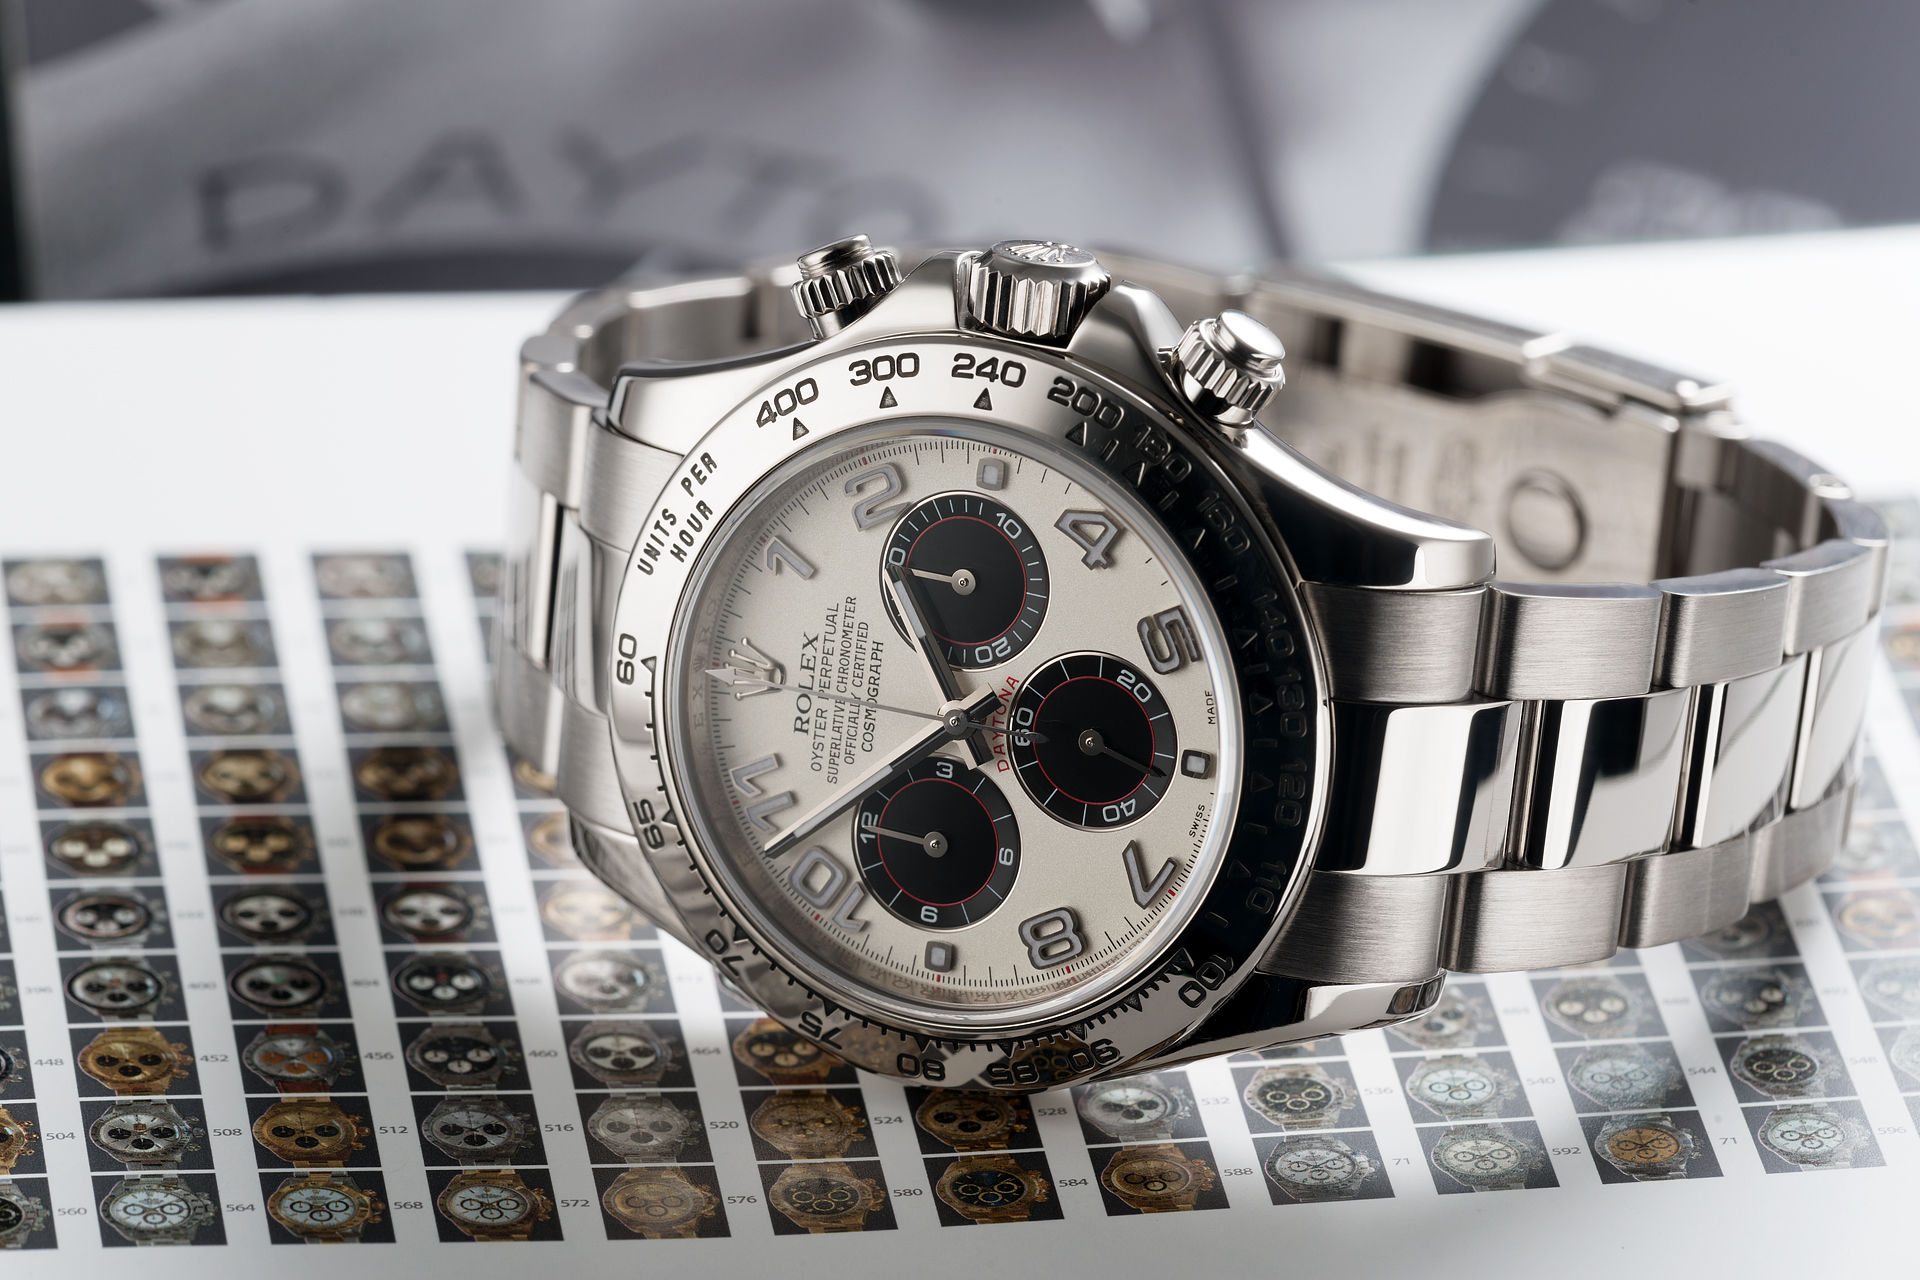 ref 116509 | '3 Colour Panda' Box and Papers | Rolex Cosmograph Daytona